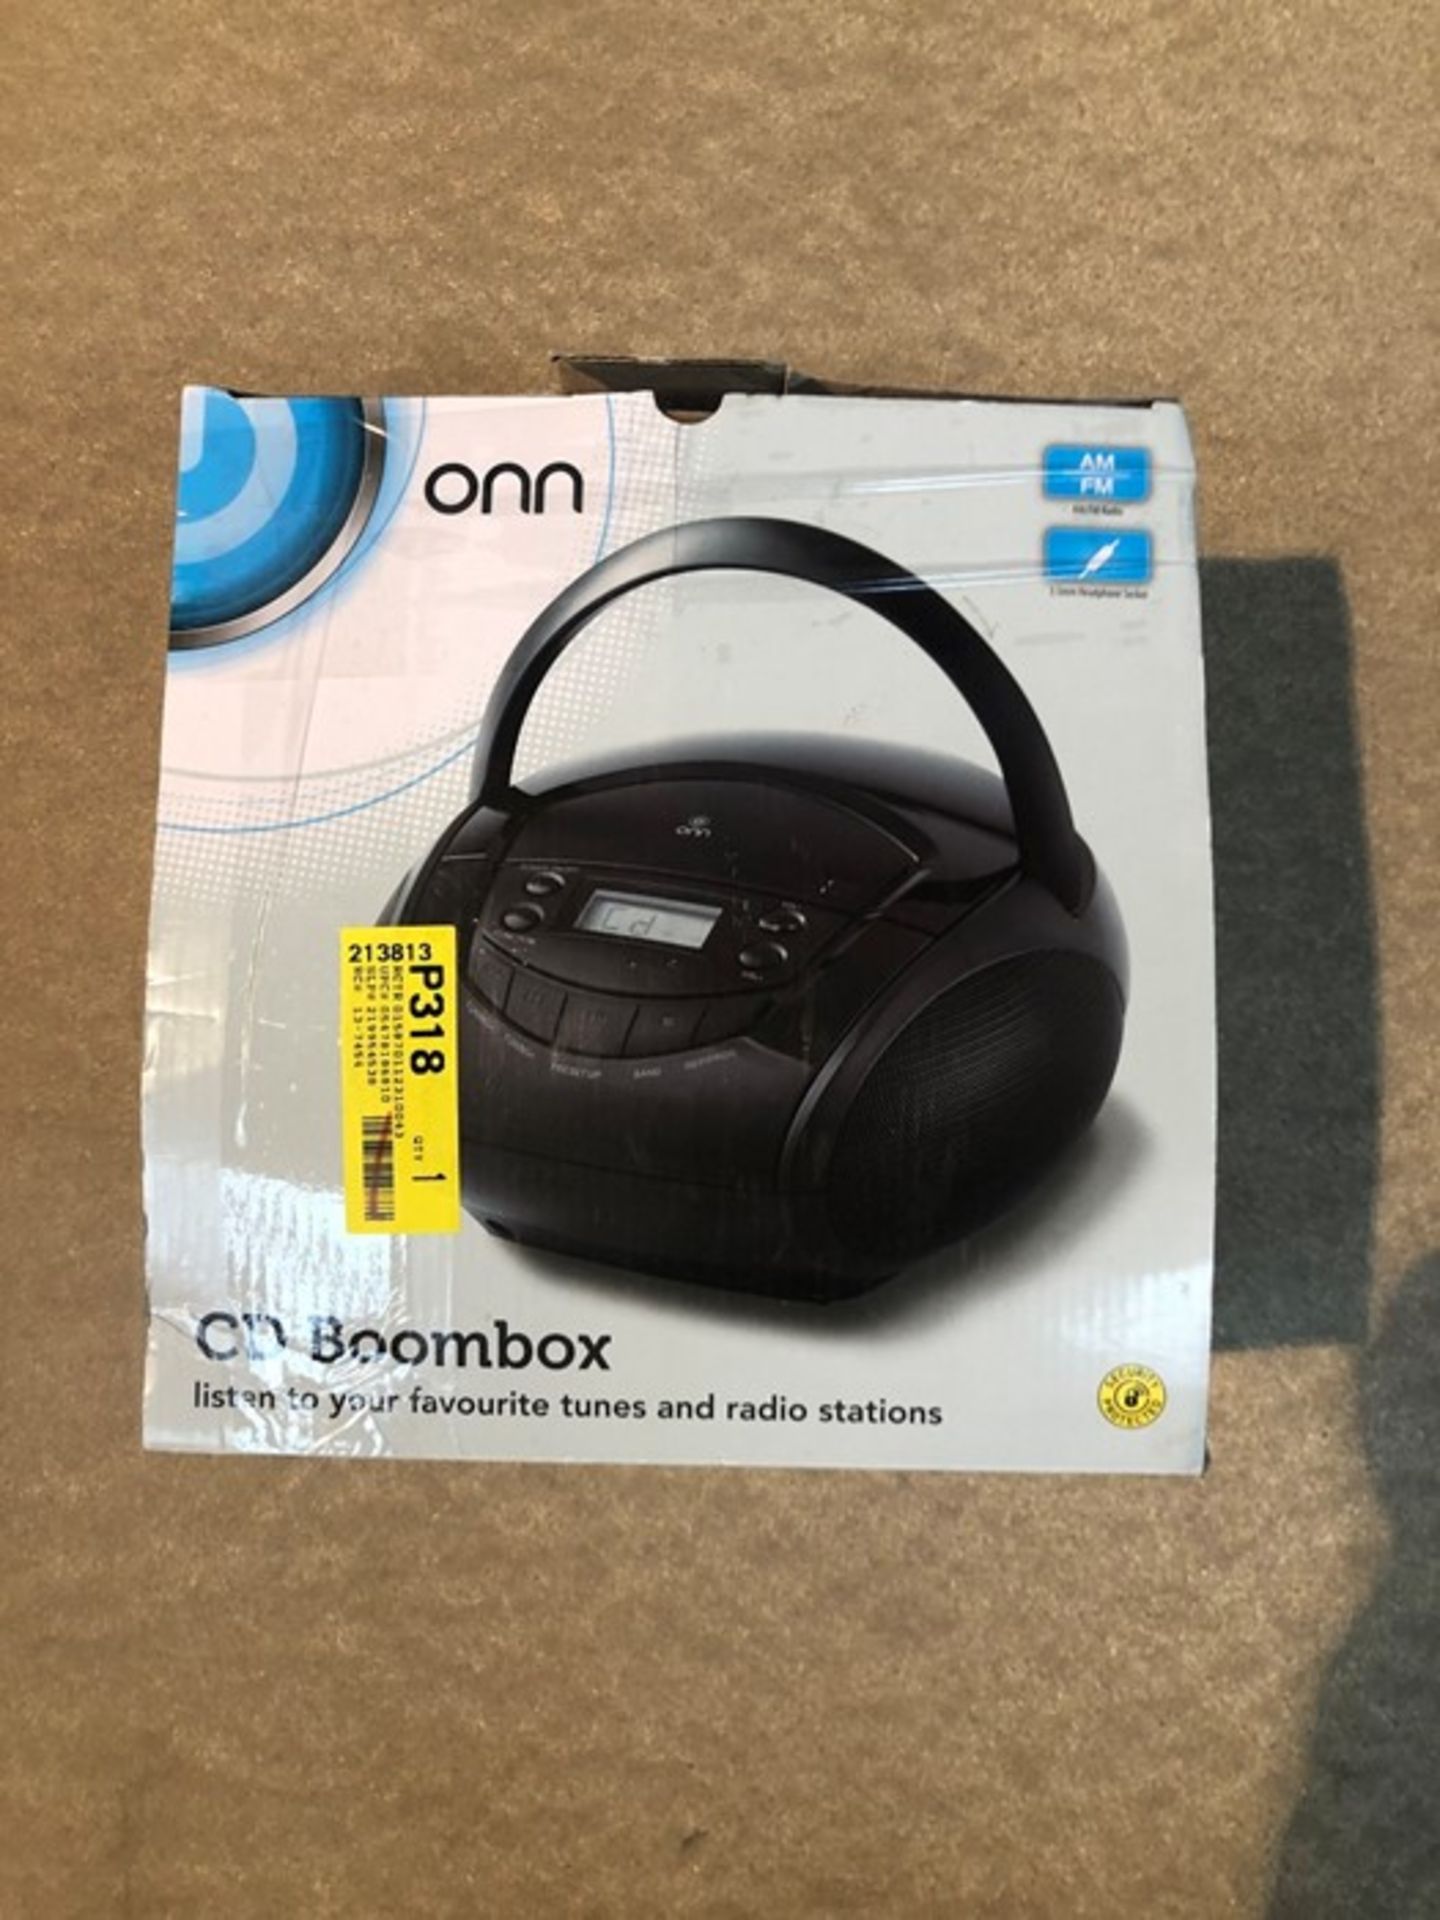 1 BOXED ONN CD BOOMBOX IN BLACK / RRP £20.00 - BL -3813 (VIEWING HIGHLY RECOMMENDED)